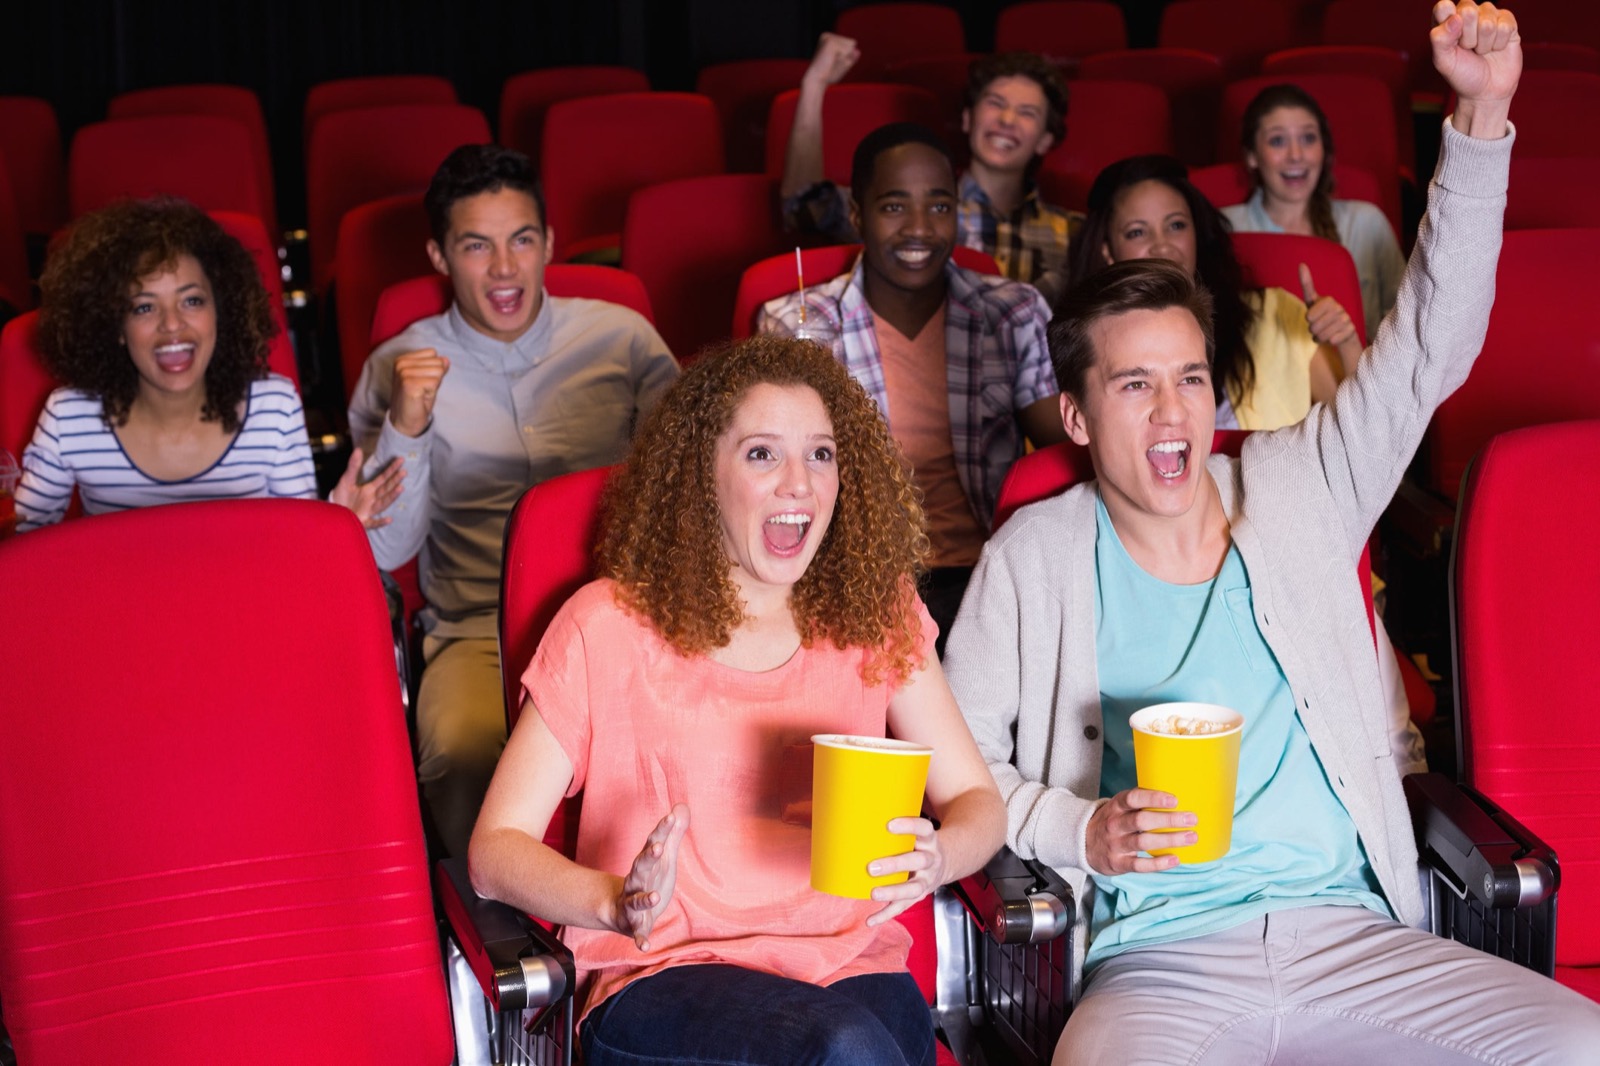 What’s Your Most Toxic Trait? Small Audience Cheering In A Movie Theater Cinema